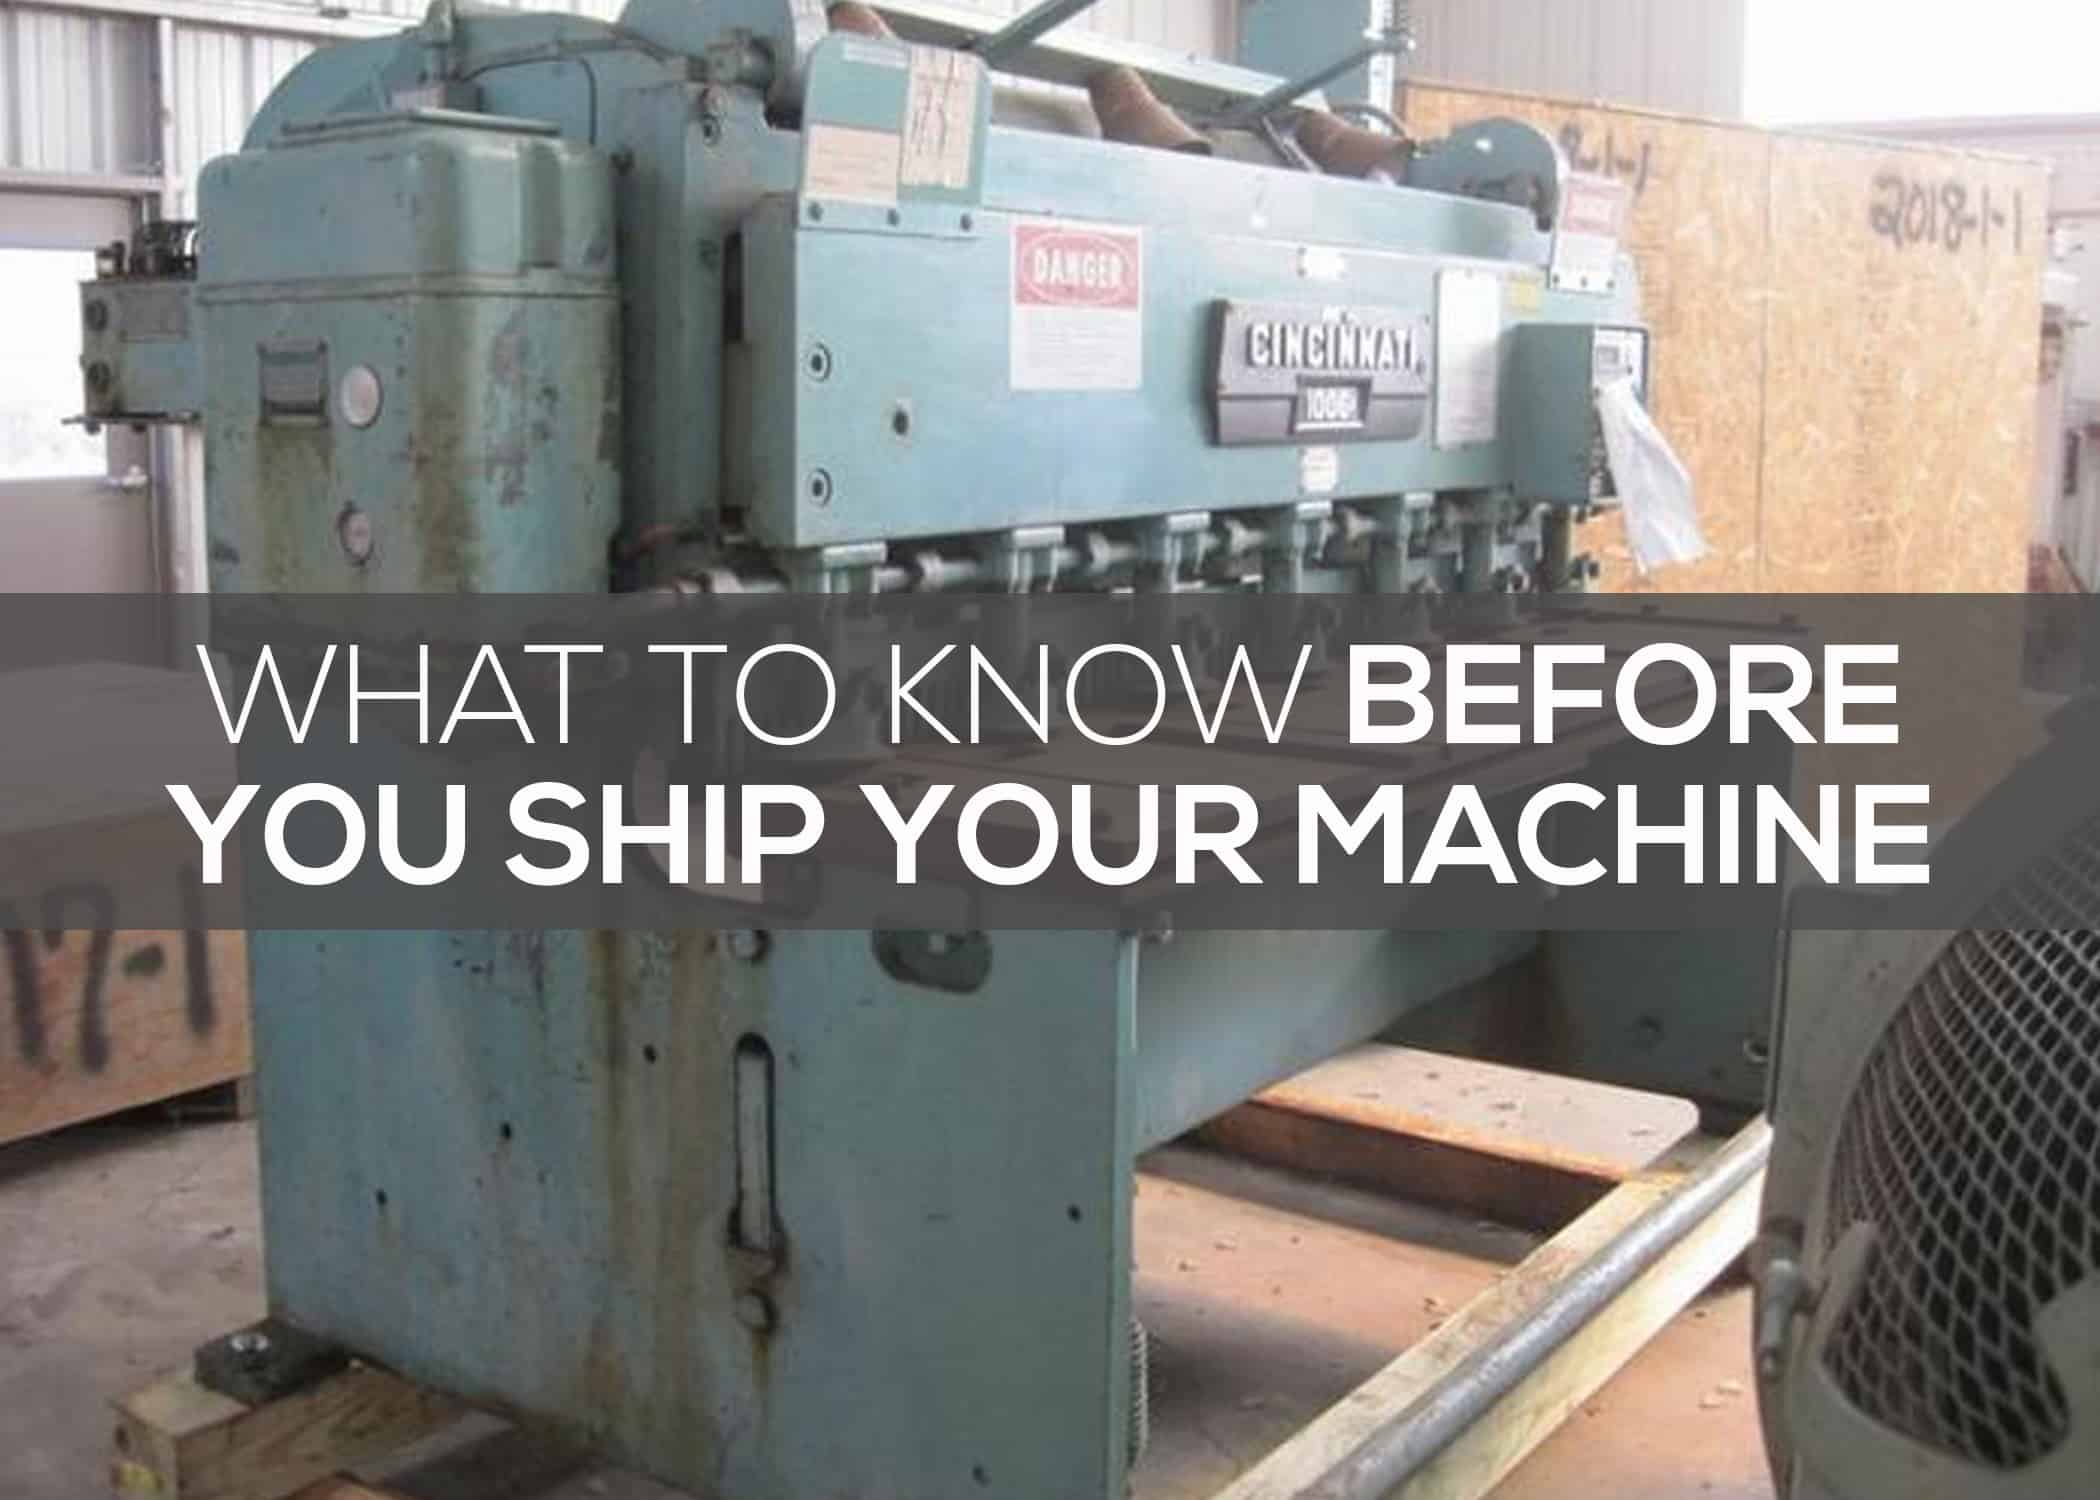 Before You Ship Your Machine